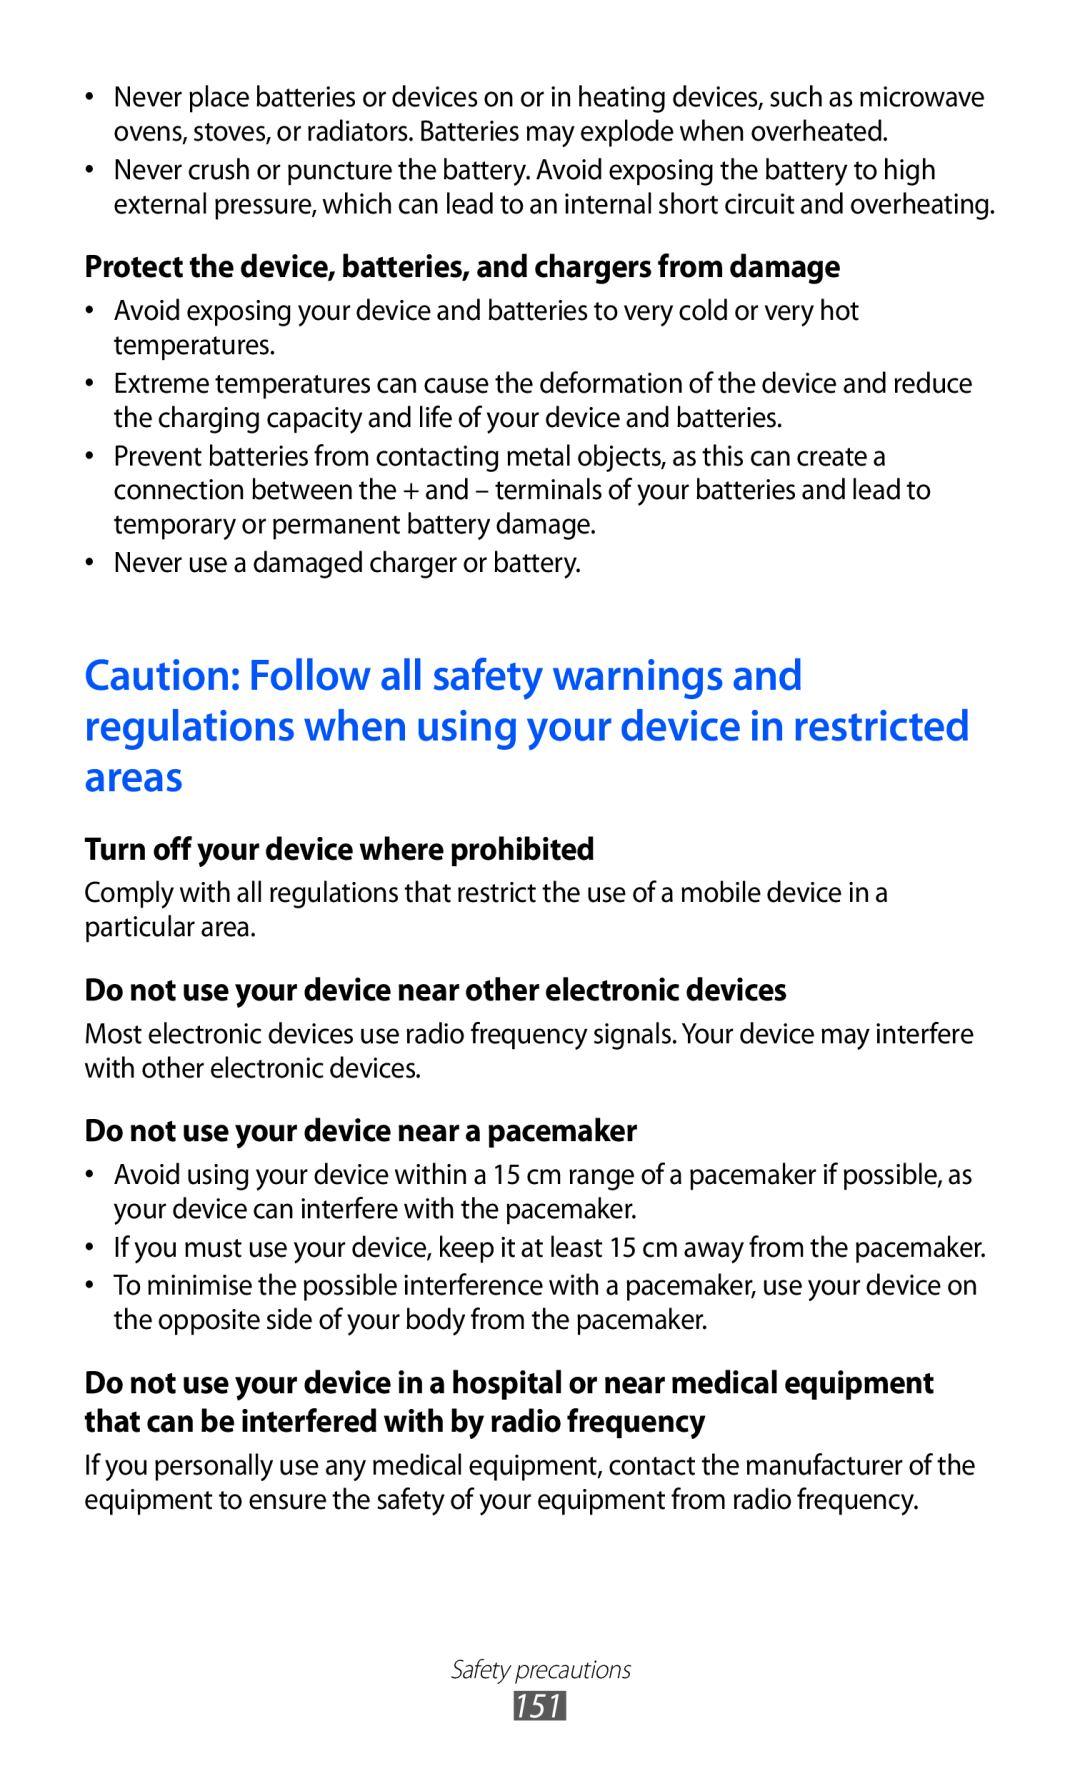 Samsung GT-I9070 user manual Protect the device, batteries, and chargers from damage, Turn off your device where prohibited 